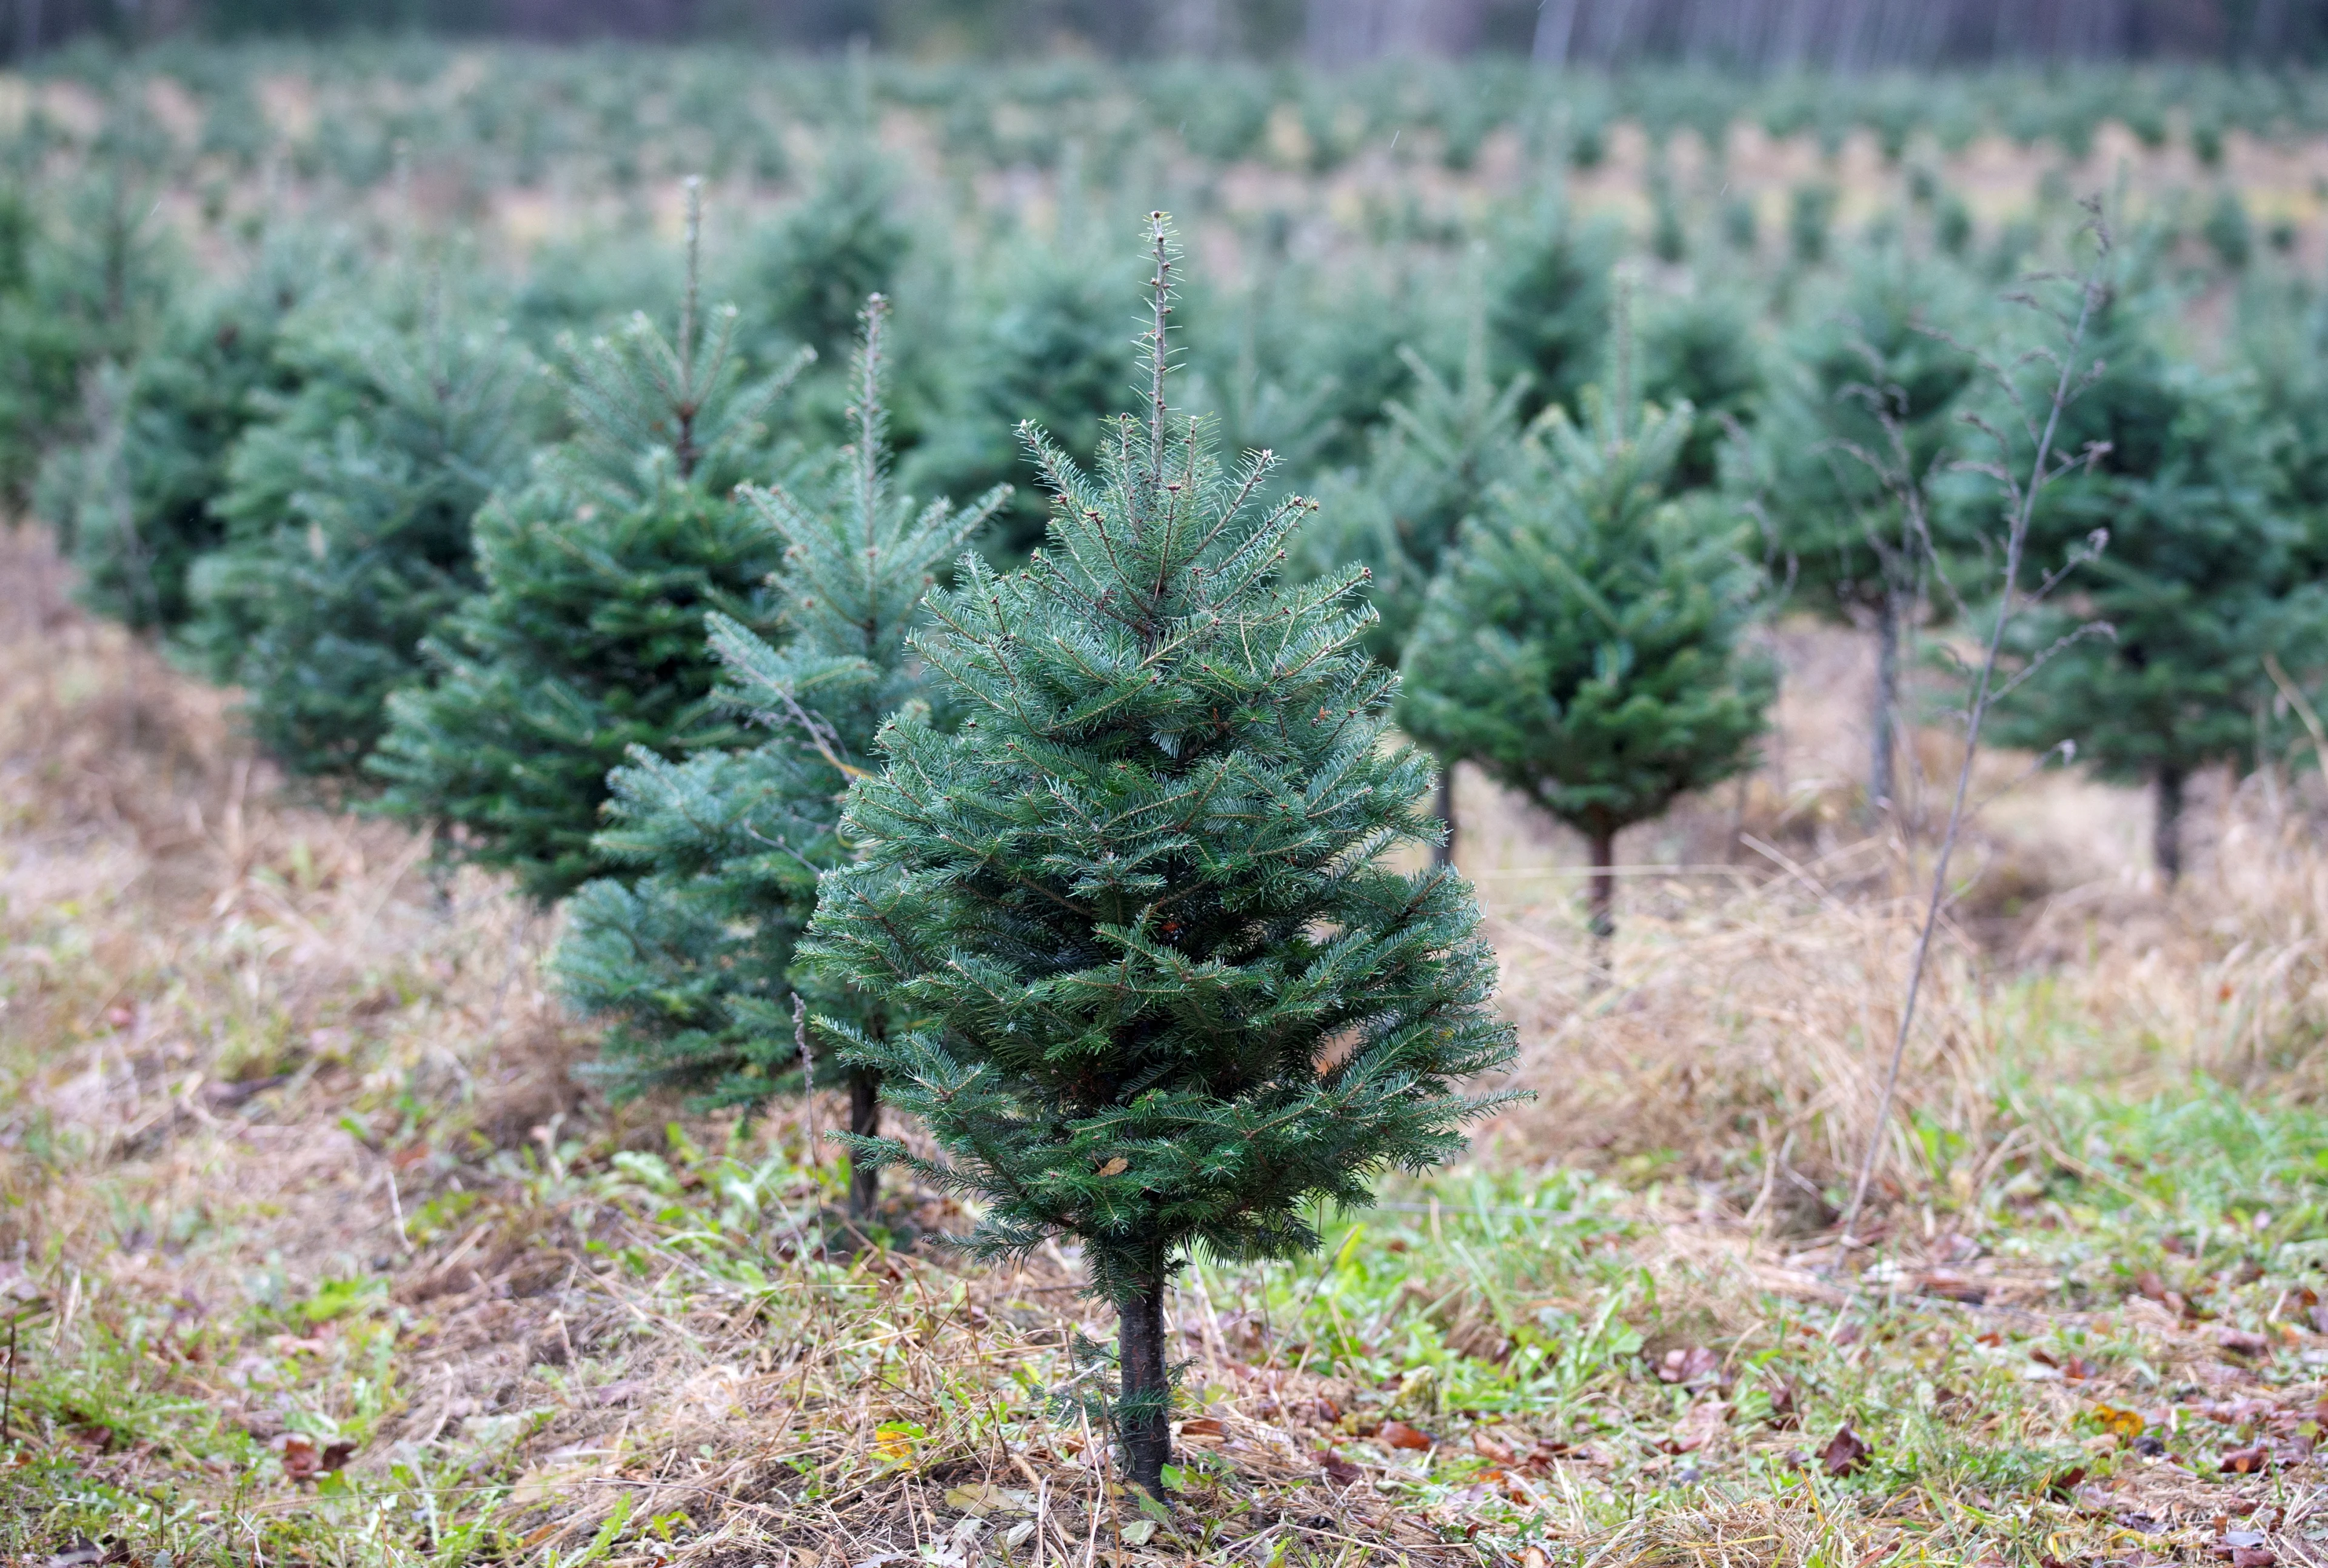 REUTERS: FILE PHOTO: Ten year old Balsam fir trees grow at Downey Tree Farm and Nursery in Hatley, Quebec, Canada November 12, 2021. REUTERS/Christinne Muschi/File Photo